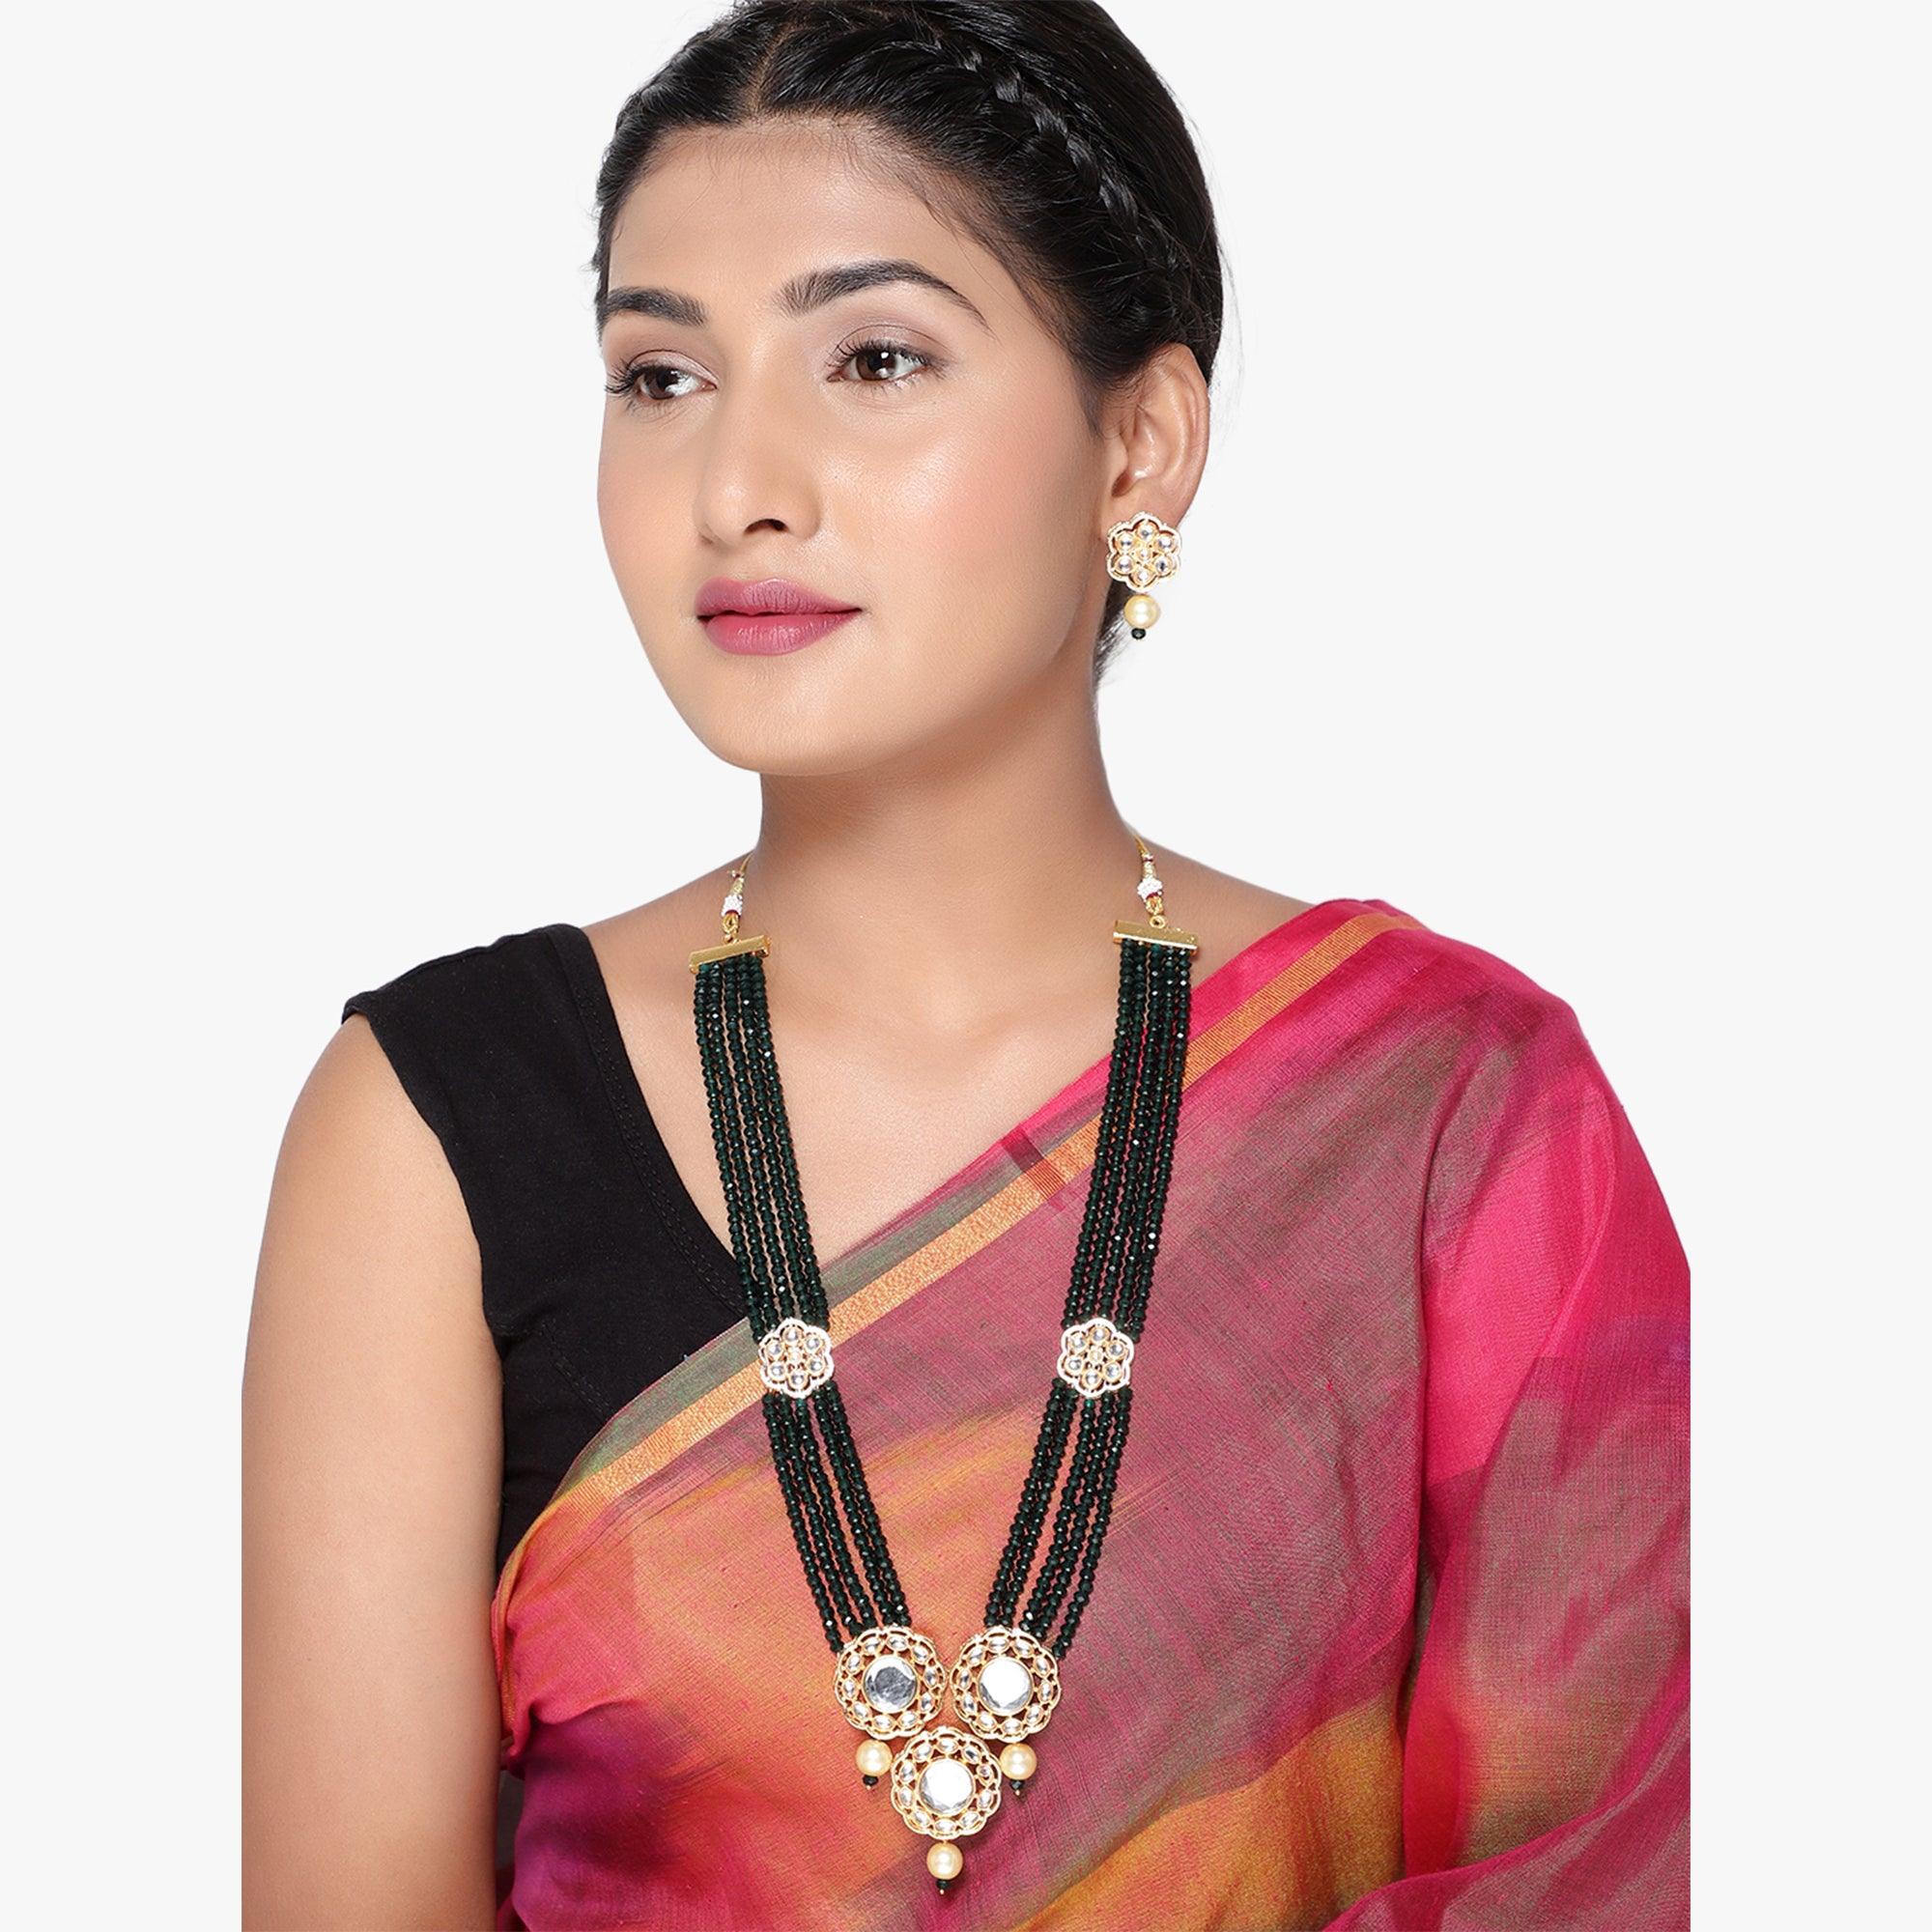 Buy Prapti Handicrafts Cotton Thread Crochet Beads Necklace And Earring  Jewellery Set For Women (Black & Red) at Amazon.in